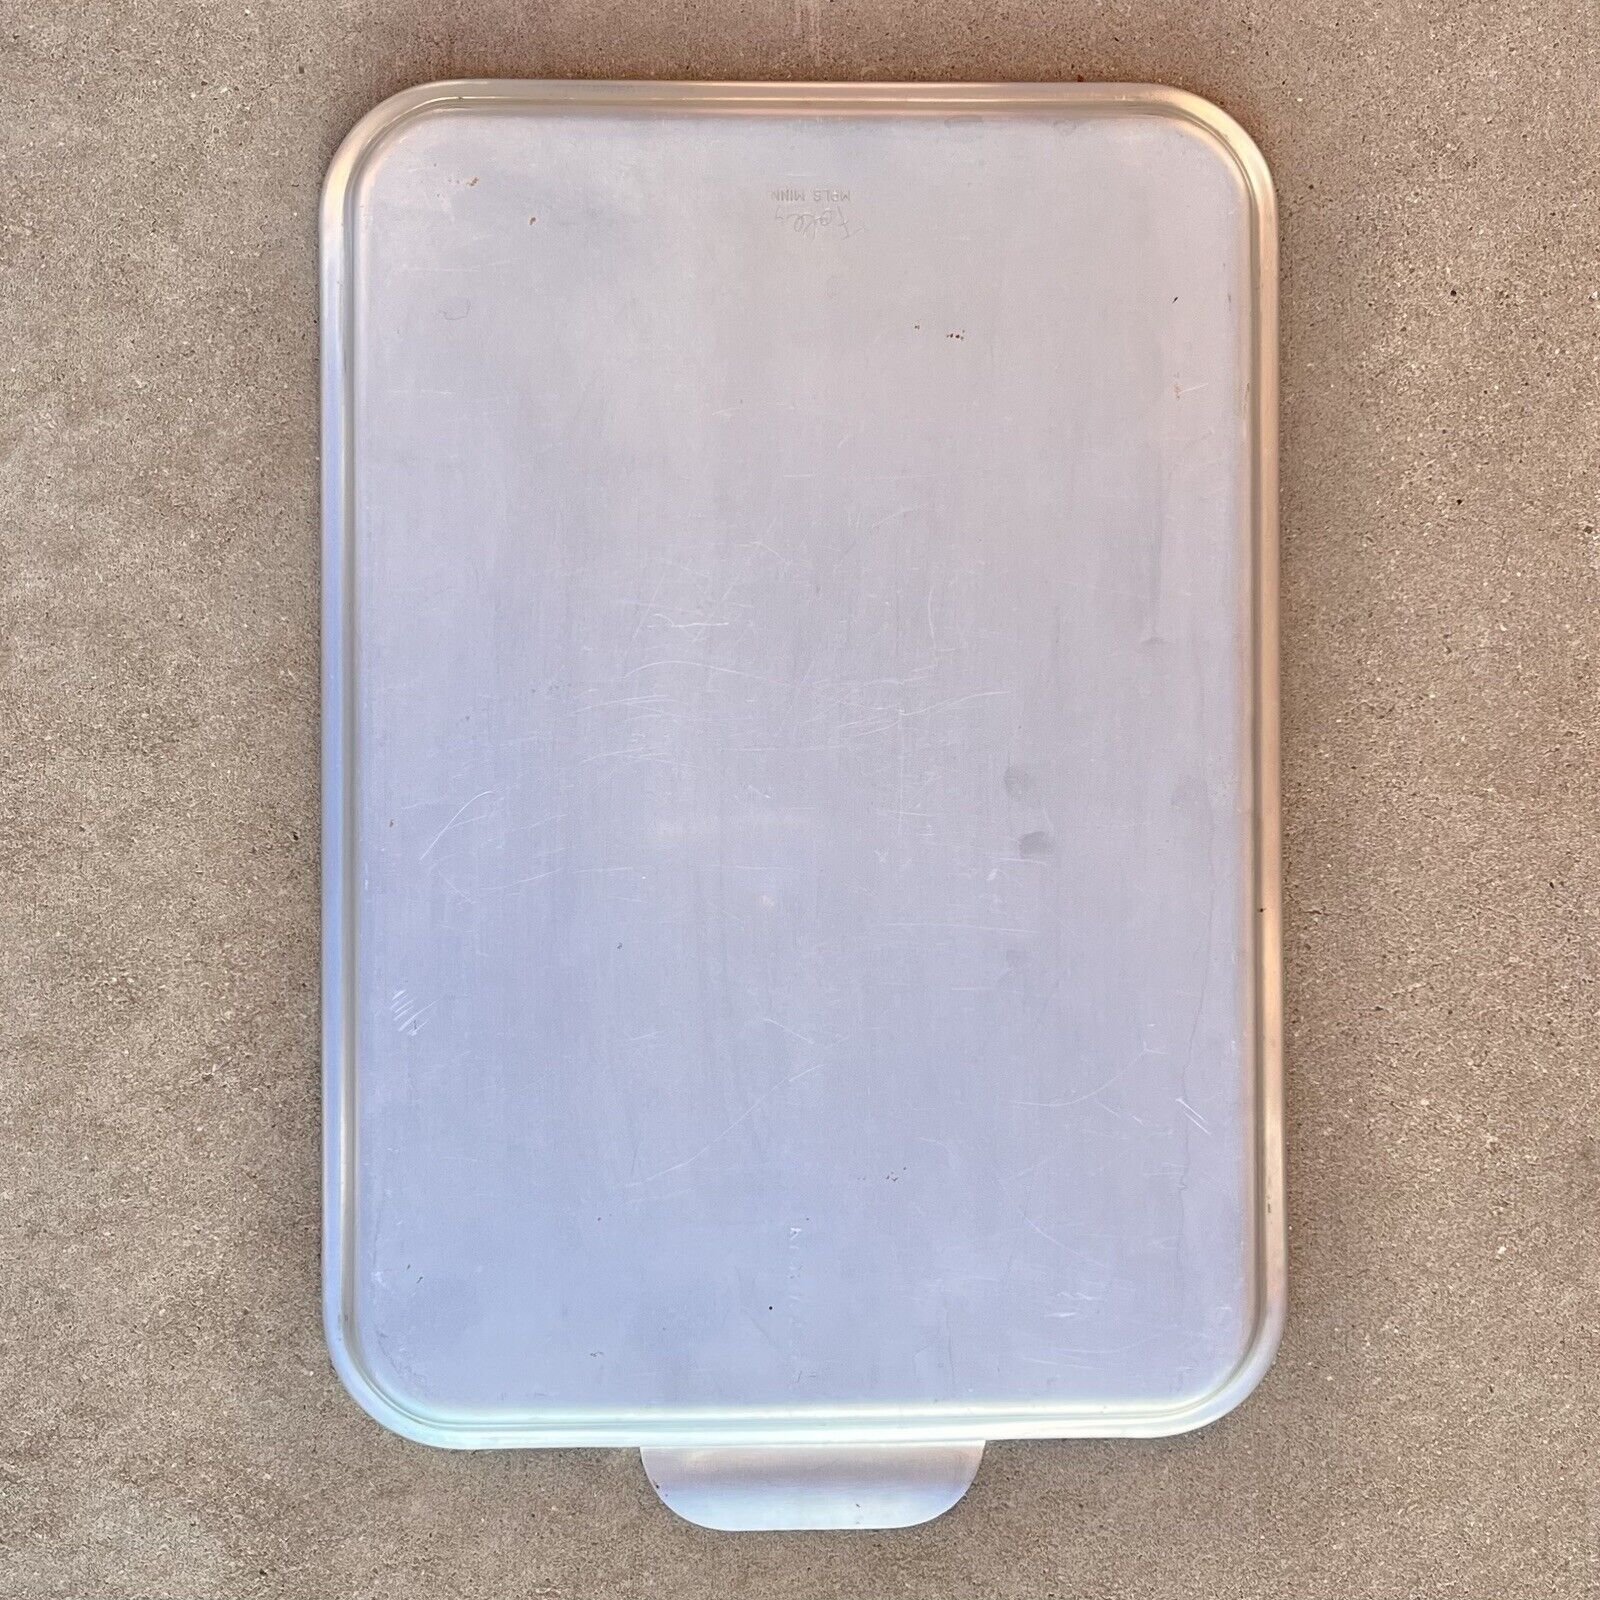 VTG FOLEY Snap-On 13x9” Cake Pan LID COVER ONLY 13.5 X 9.75” Silvertone Aluminum